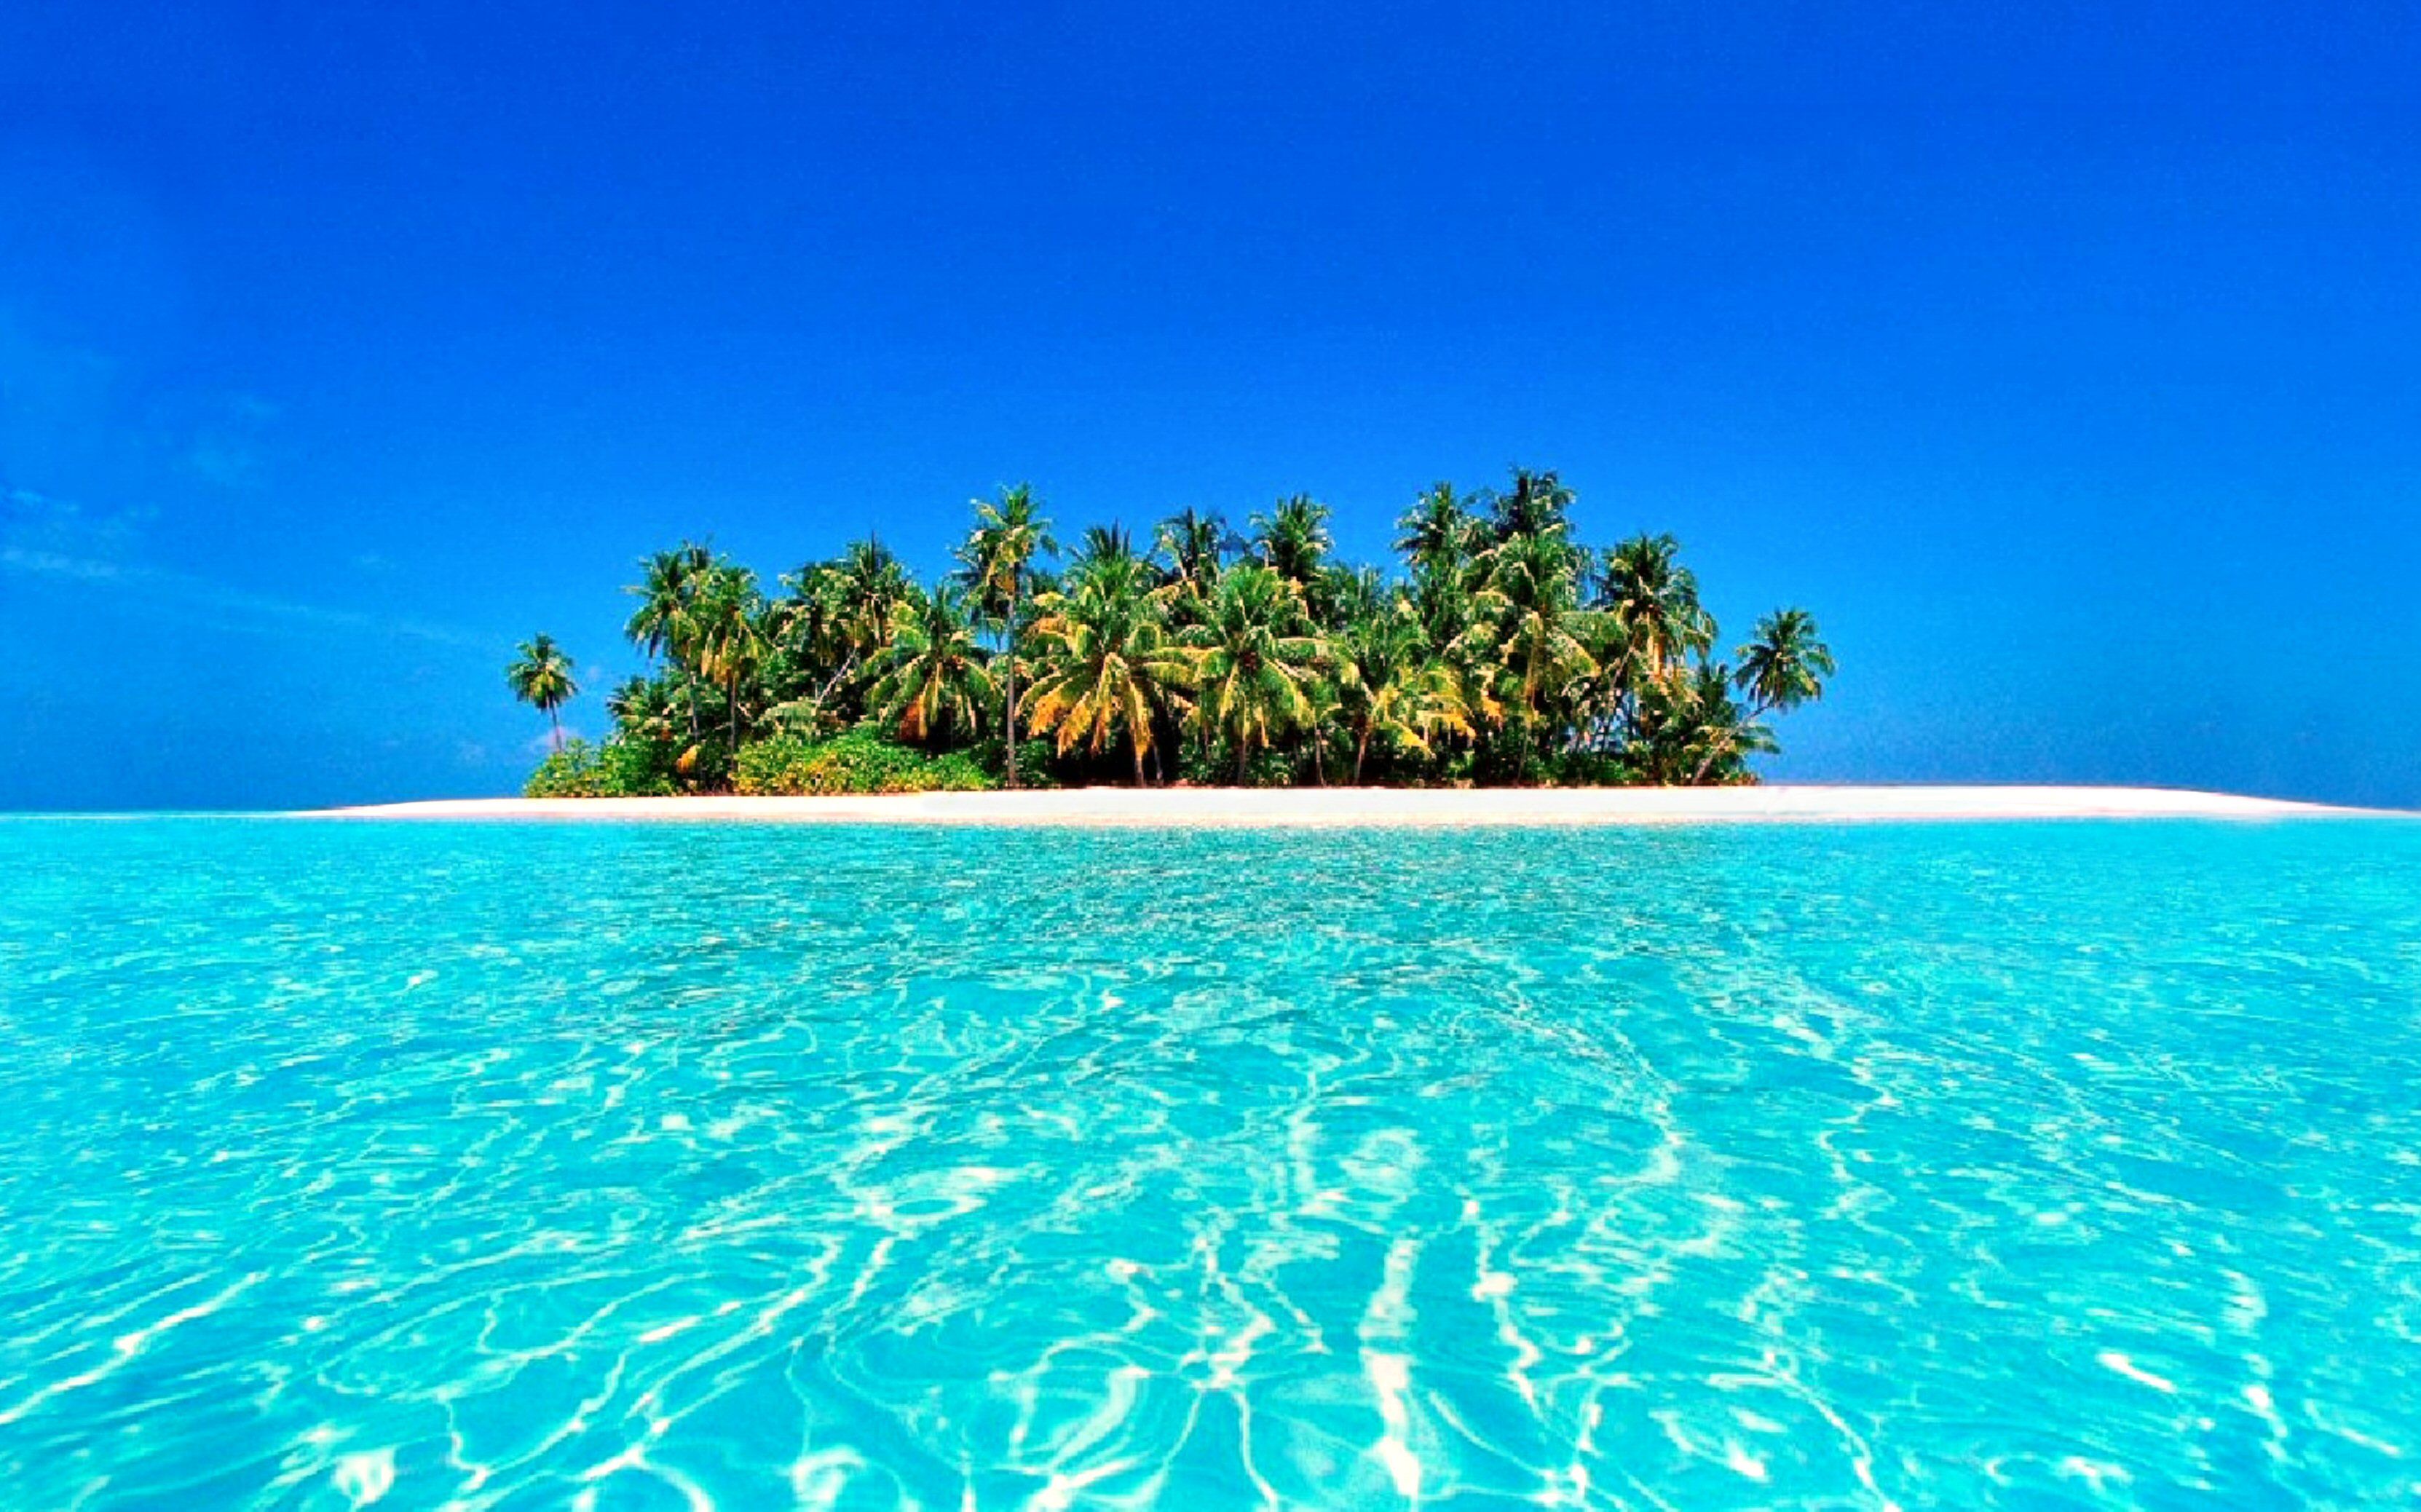 50 Tropical HD Wallpapers | Backgrounds - Wallpaper Abyss